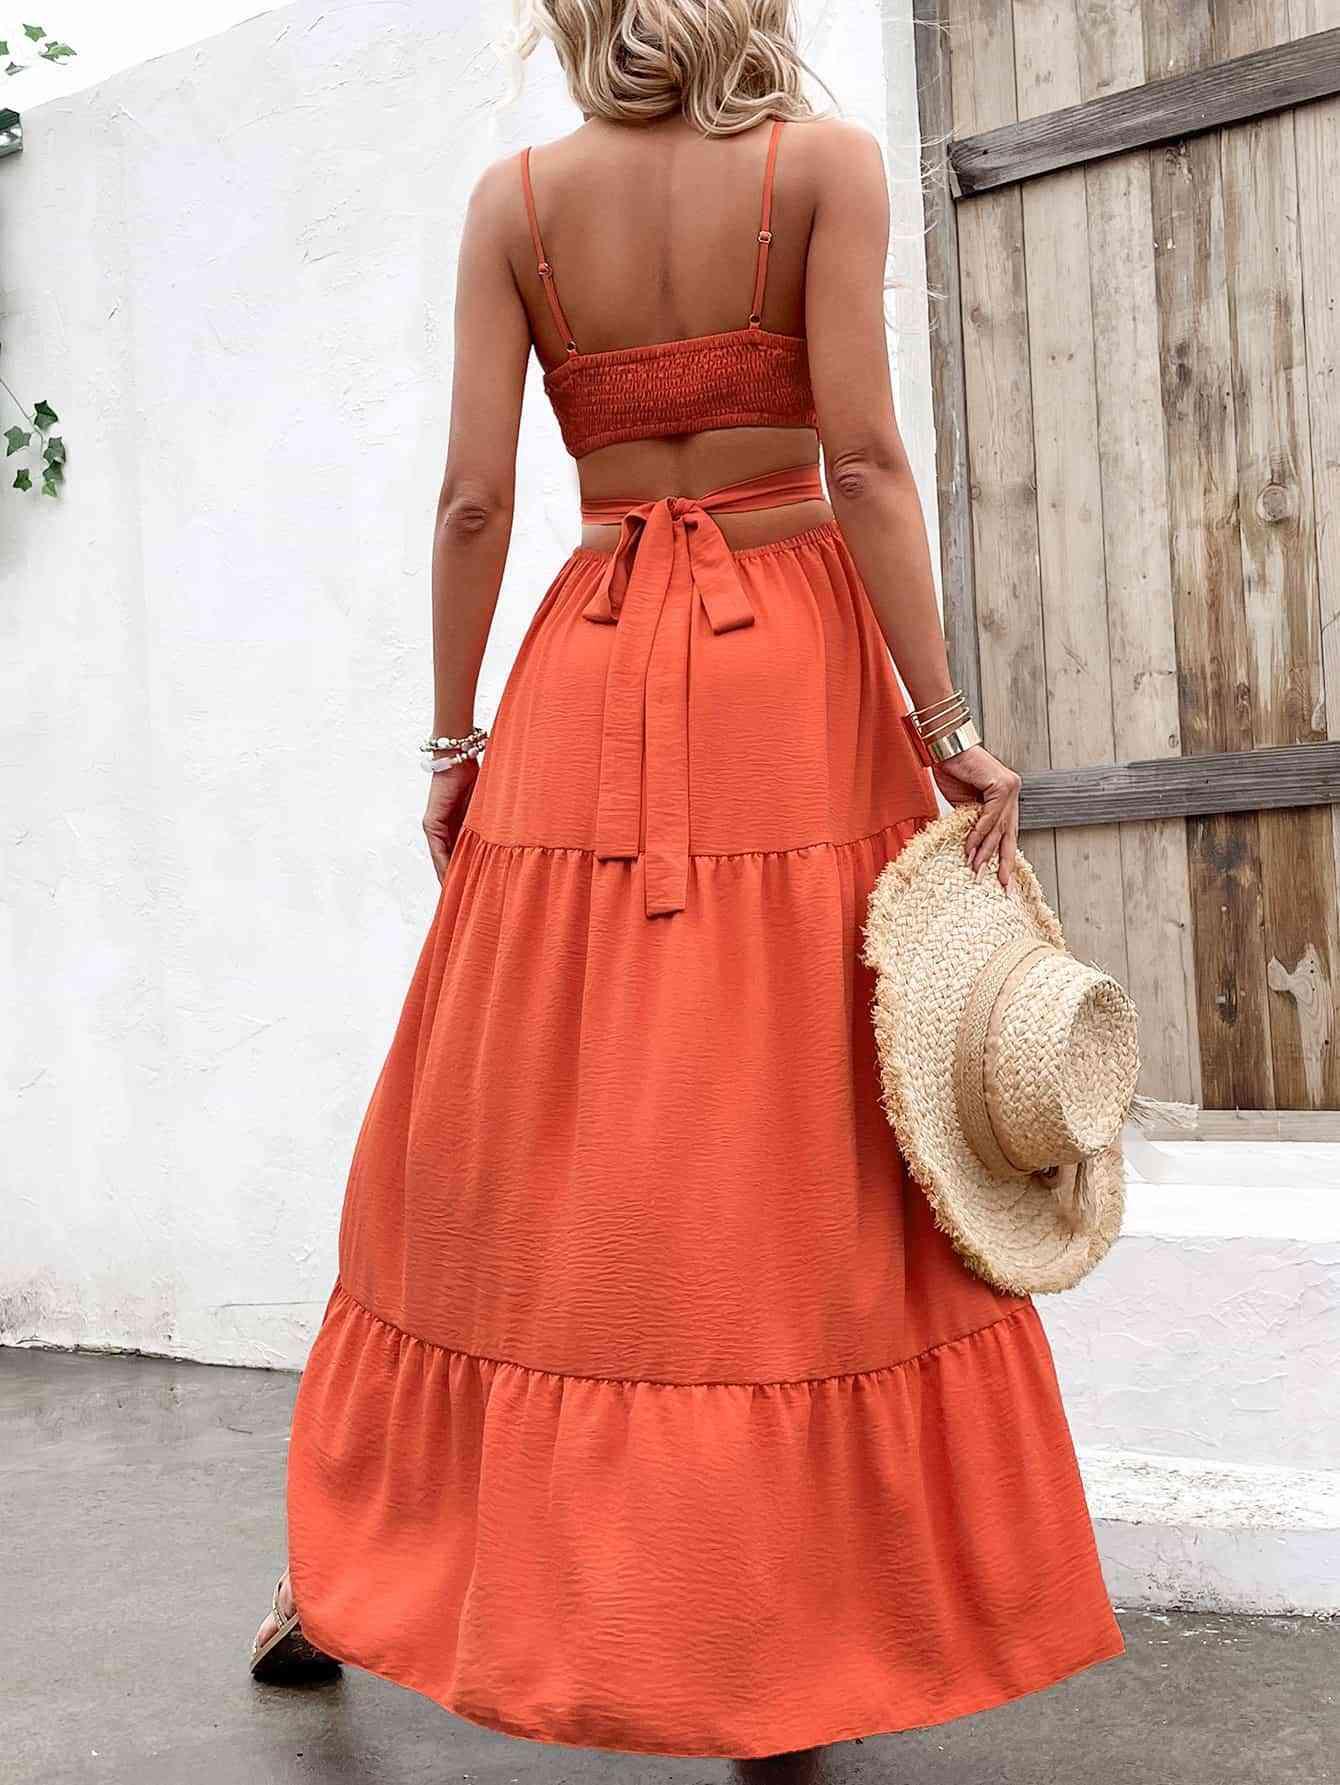 a woman in an orange dress and straw hat